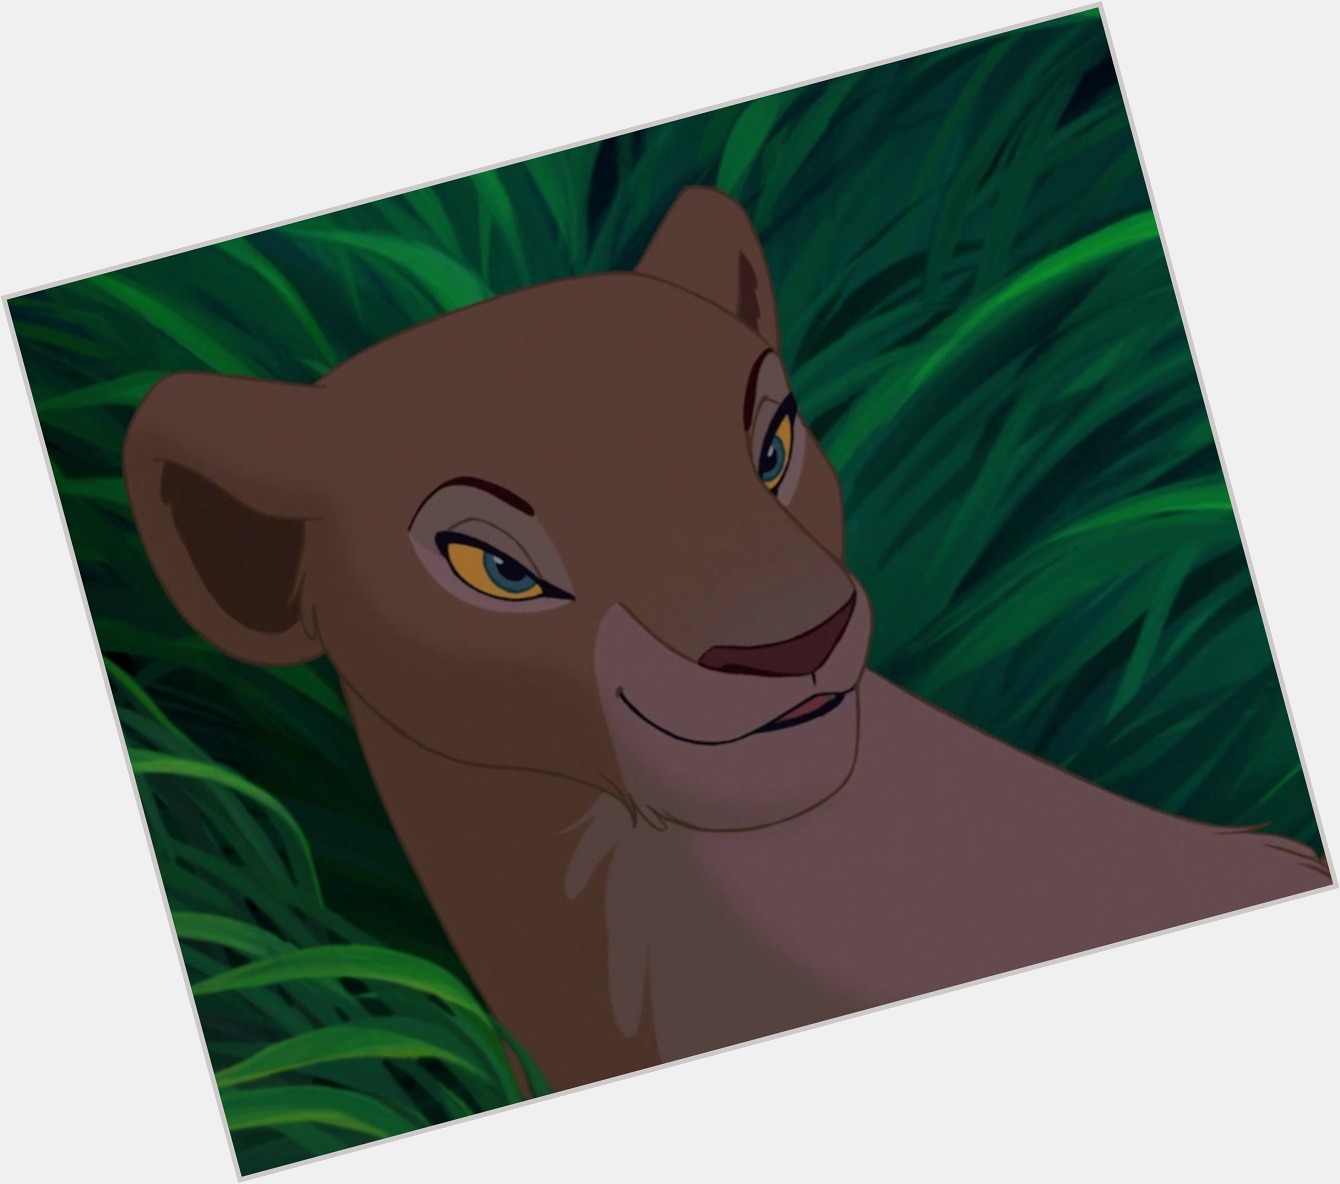 Adult Nala | Official Site for Woman Crush Wednesday #WCW